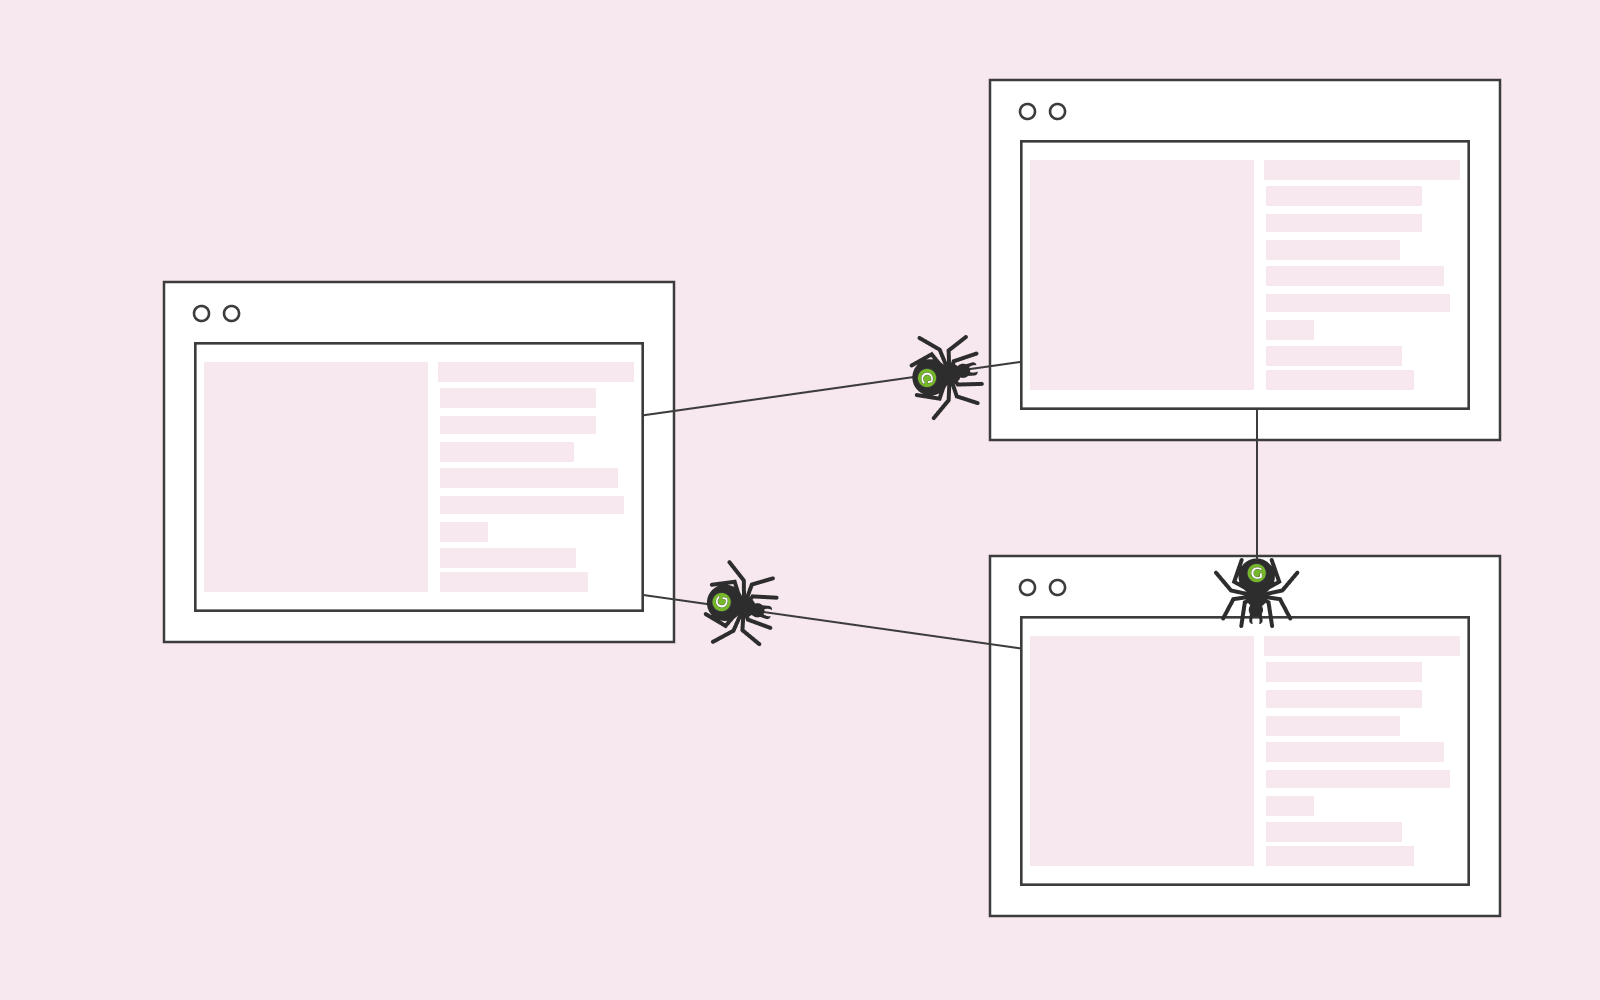 Crawl spiders finding one page through other pages